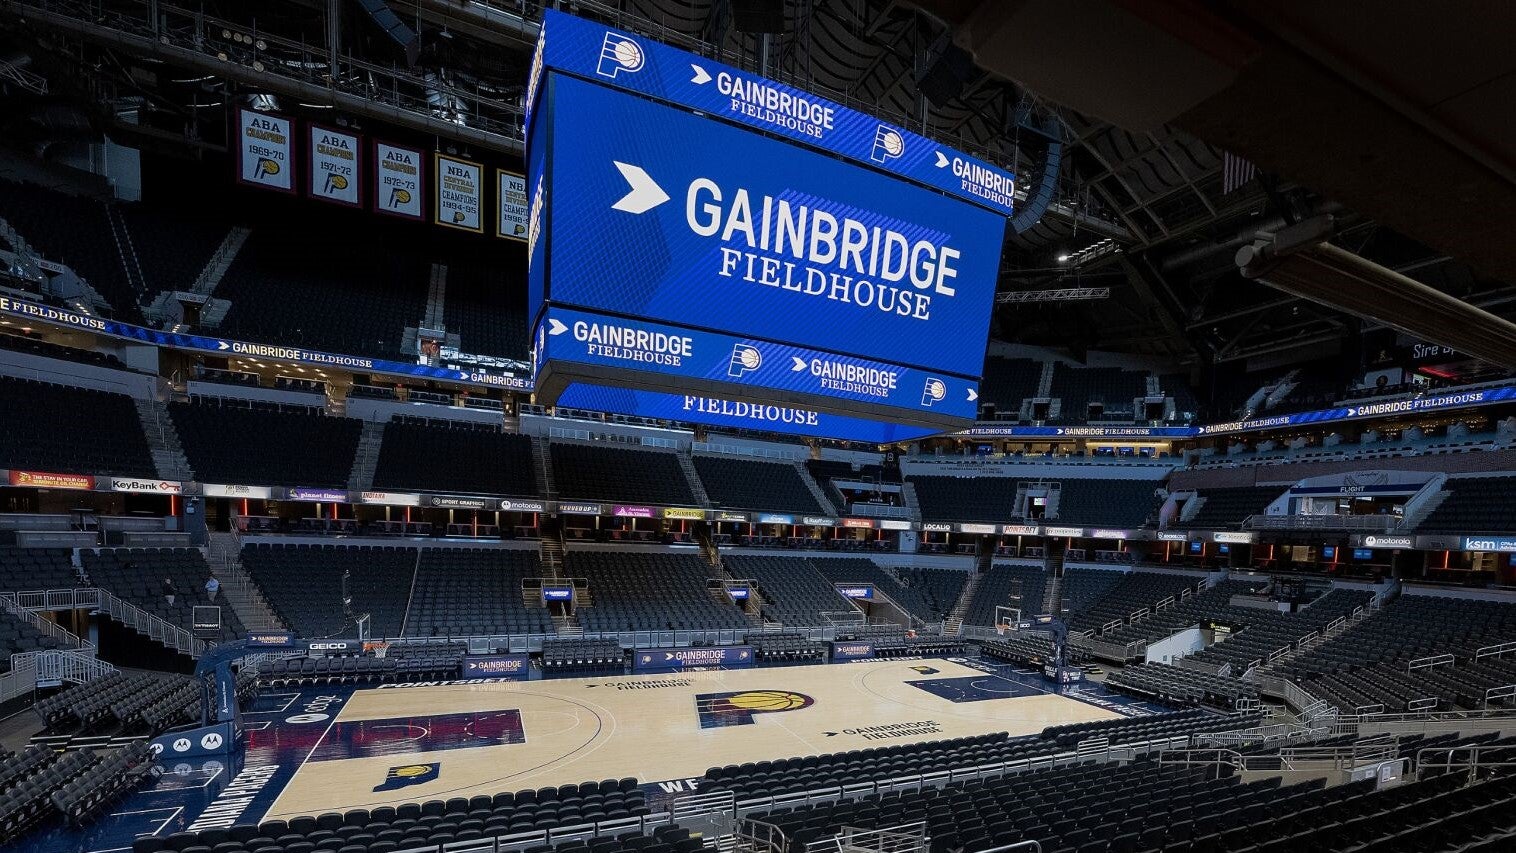 Gainbridge Fieldhouse - Watching our Indiana Pacers in Orlando 𝐫𝐞𝐚𝐥𝐥𝐲  has us missing our Pacers fans. What do you miss the most about  #PacersGameNight at The Fieldhouse? Let us know in th